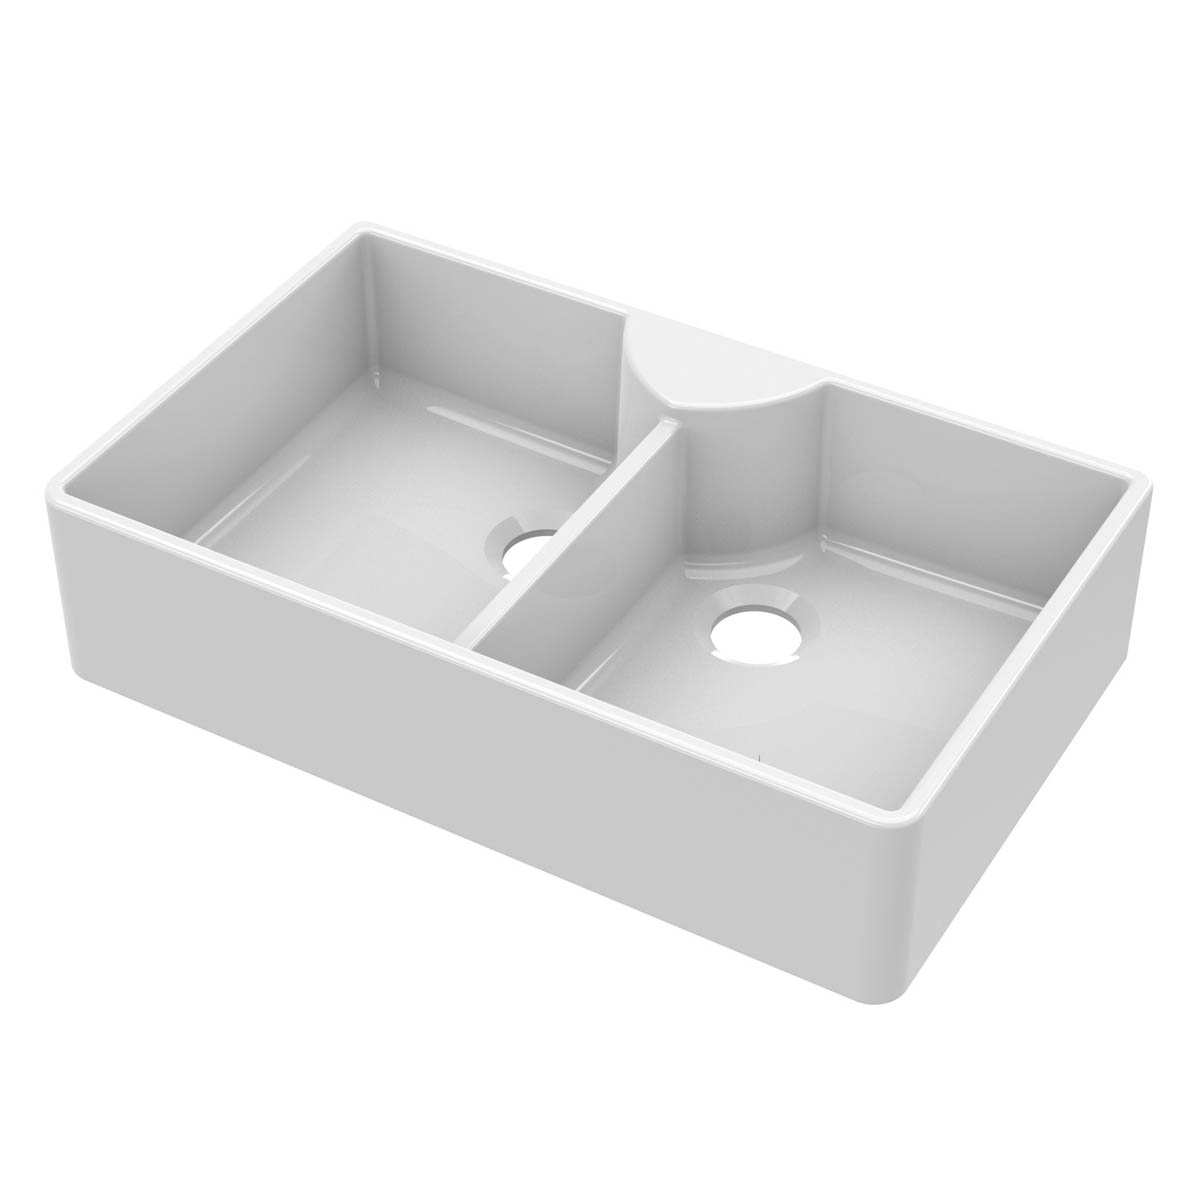 Nuie Butler Double Bowl 895x550x220mm Fireclay Sink with Stepped Weir & Tap Ledge - White (20297)